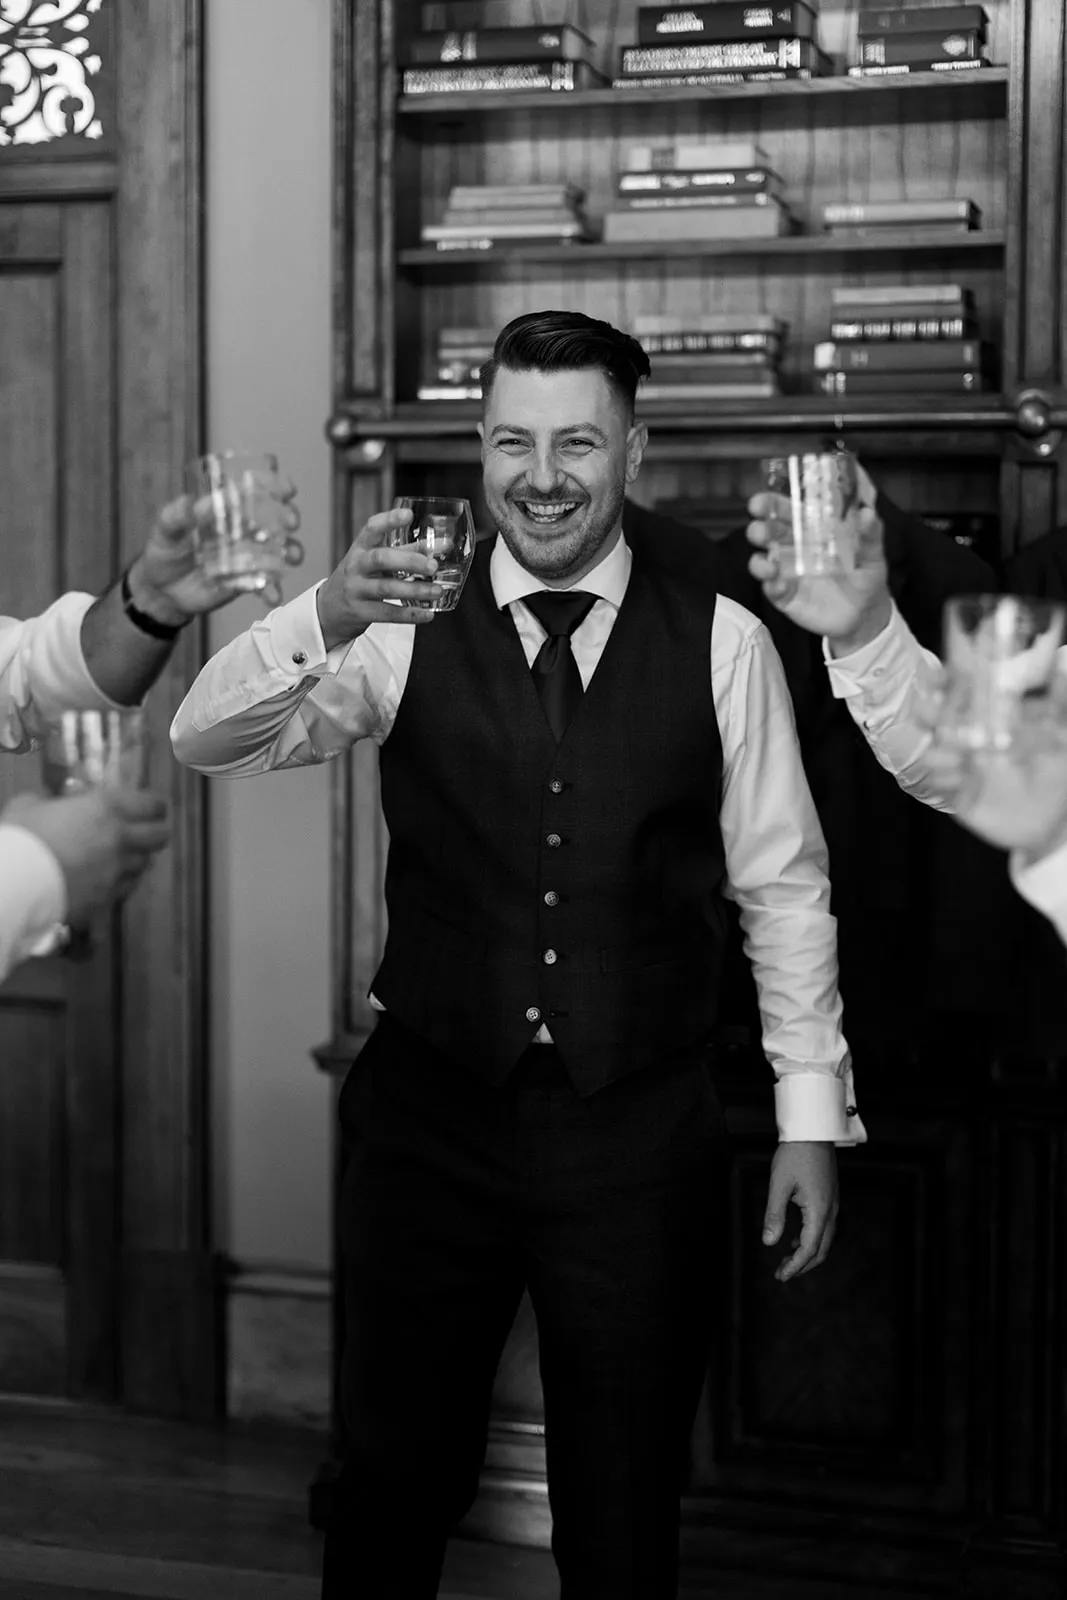 Groom drinking scotch and holding glass